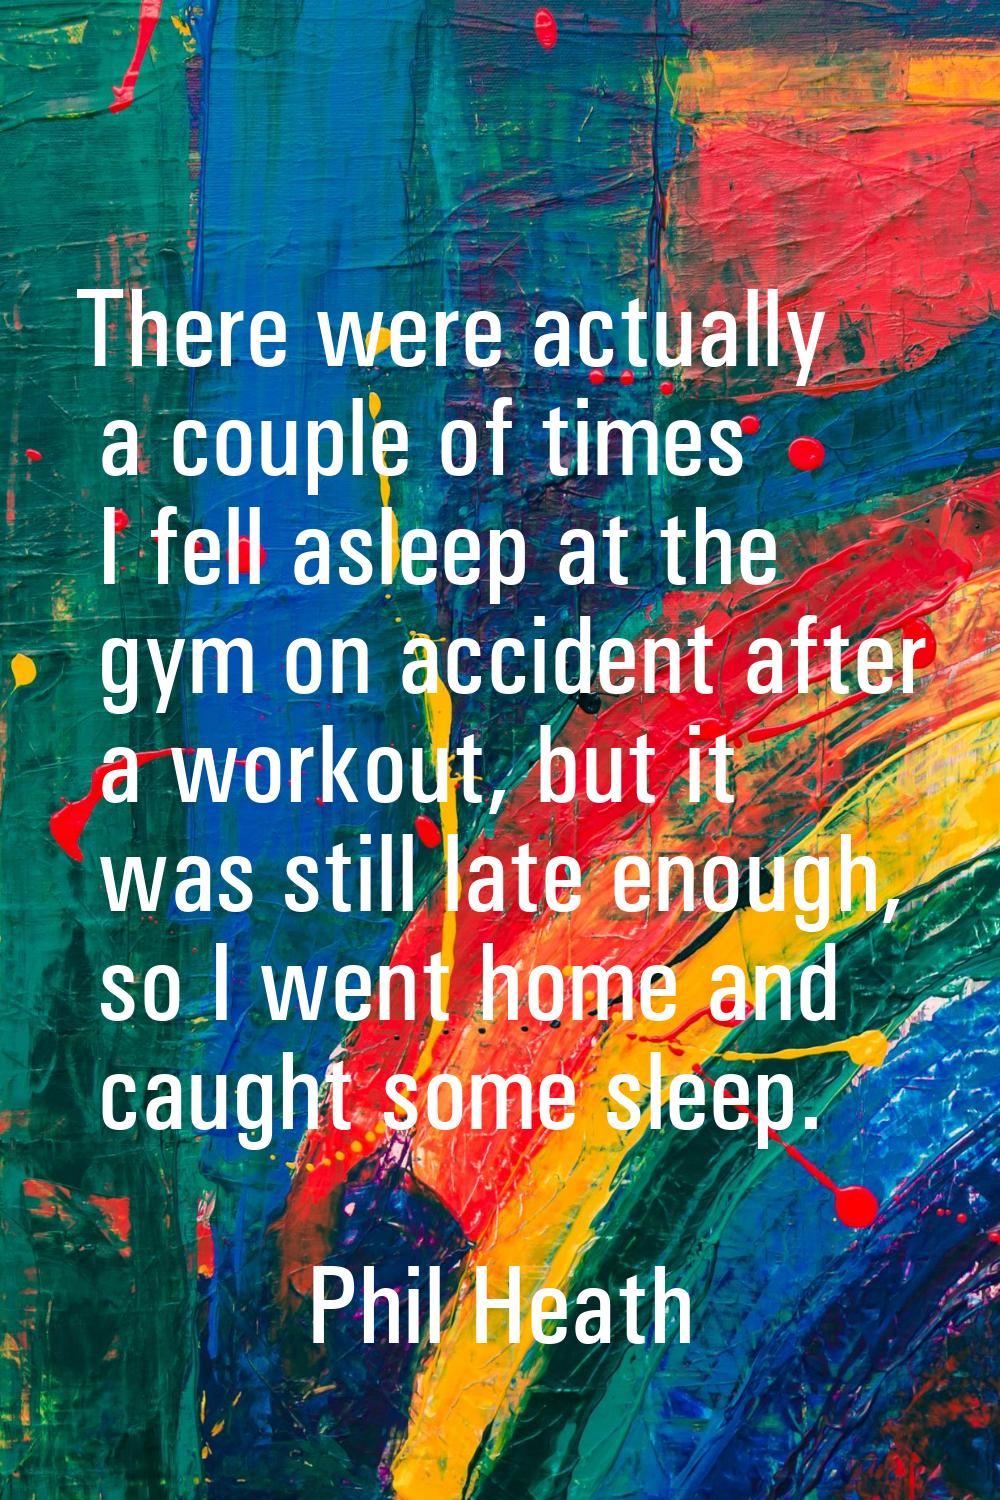 There were actually a couple of times I fell asleep at the gym on accident after a workout, but it 